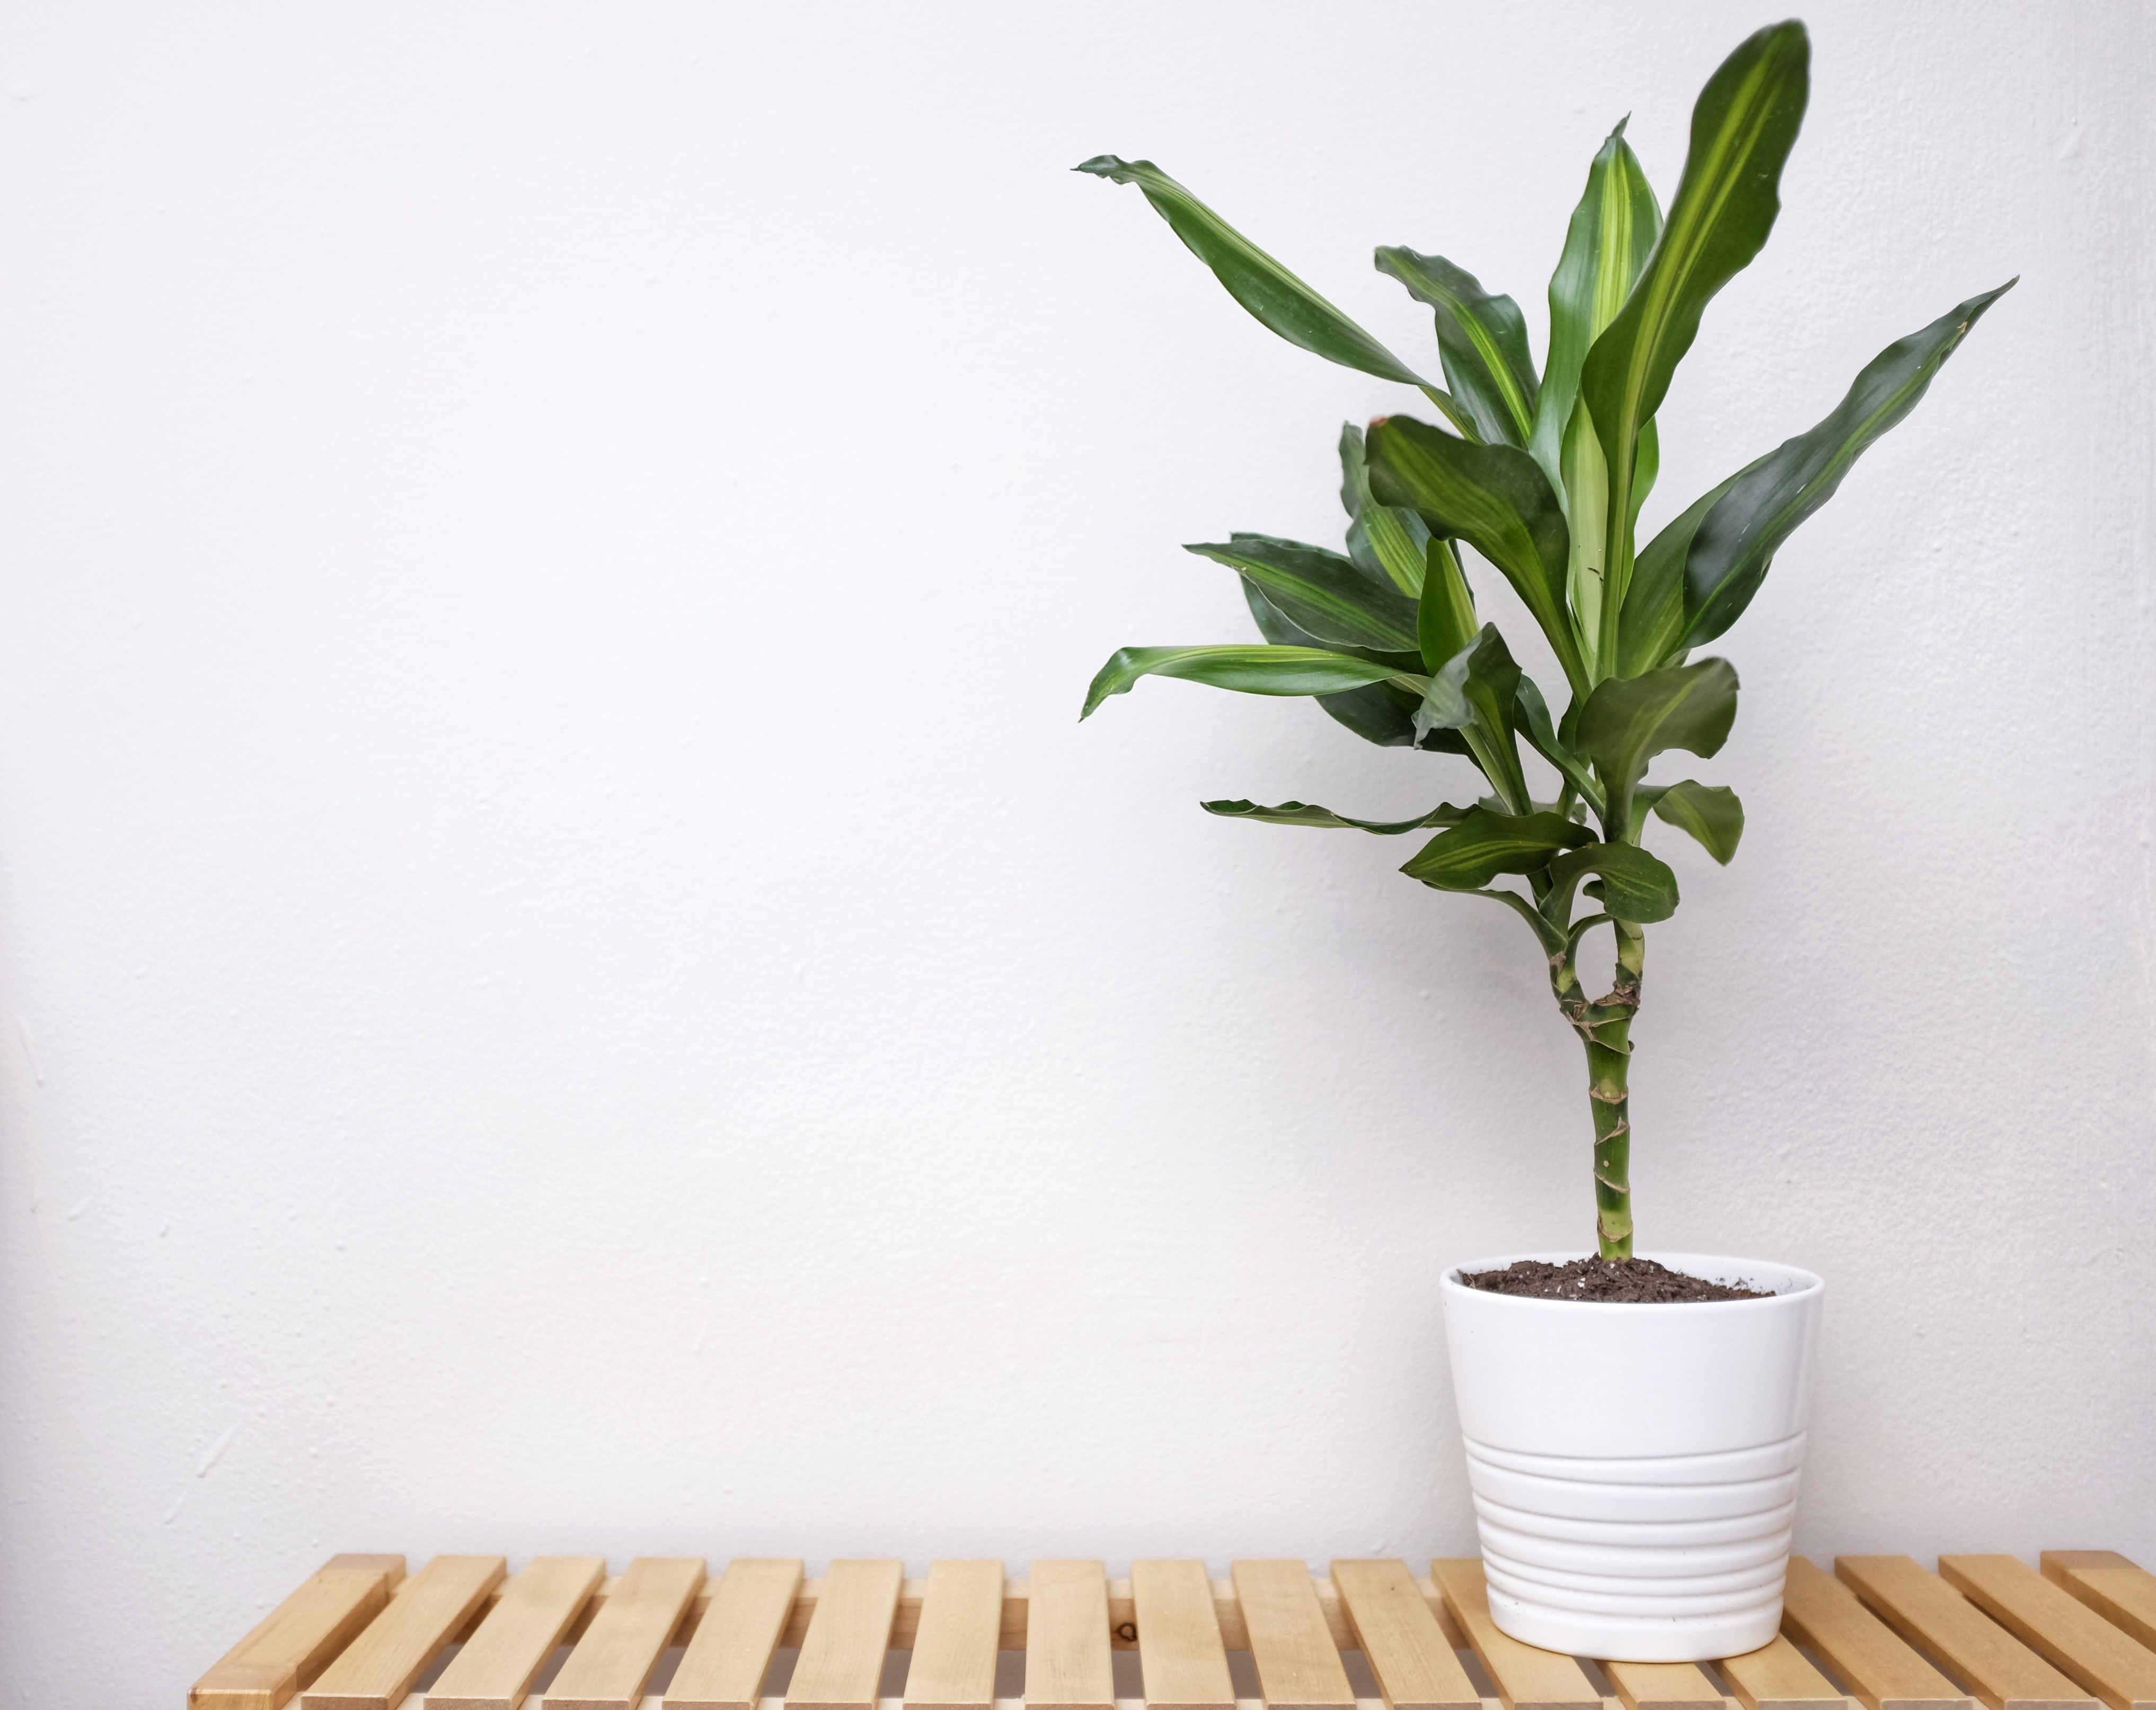 A young green plant sits in a white pot on top of a bamboo rack